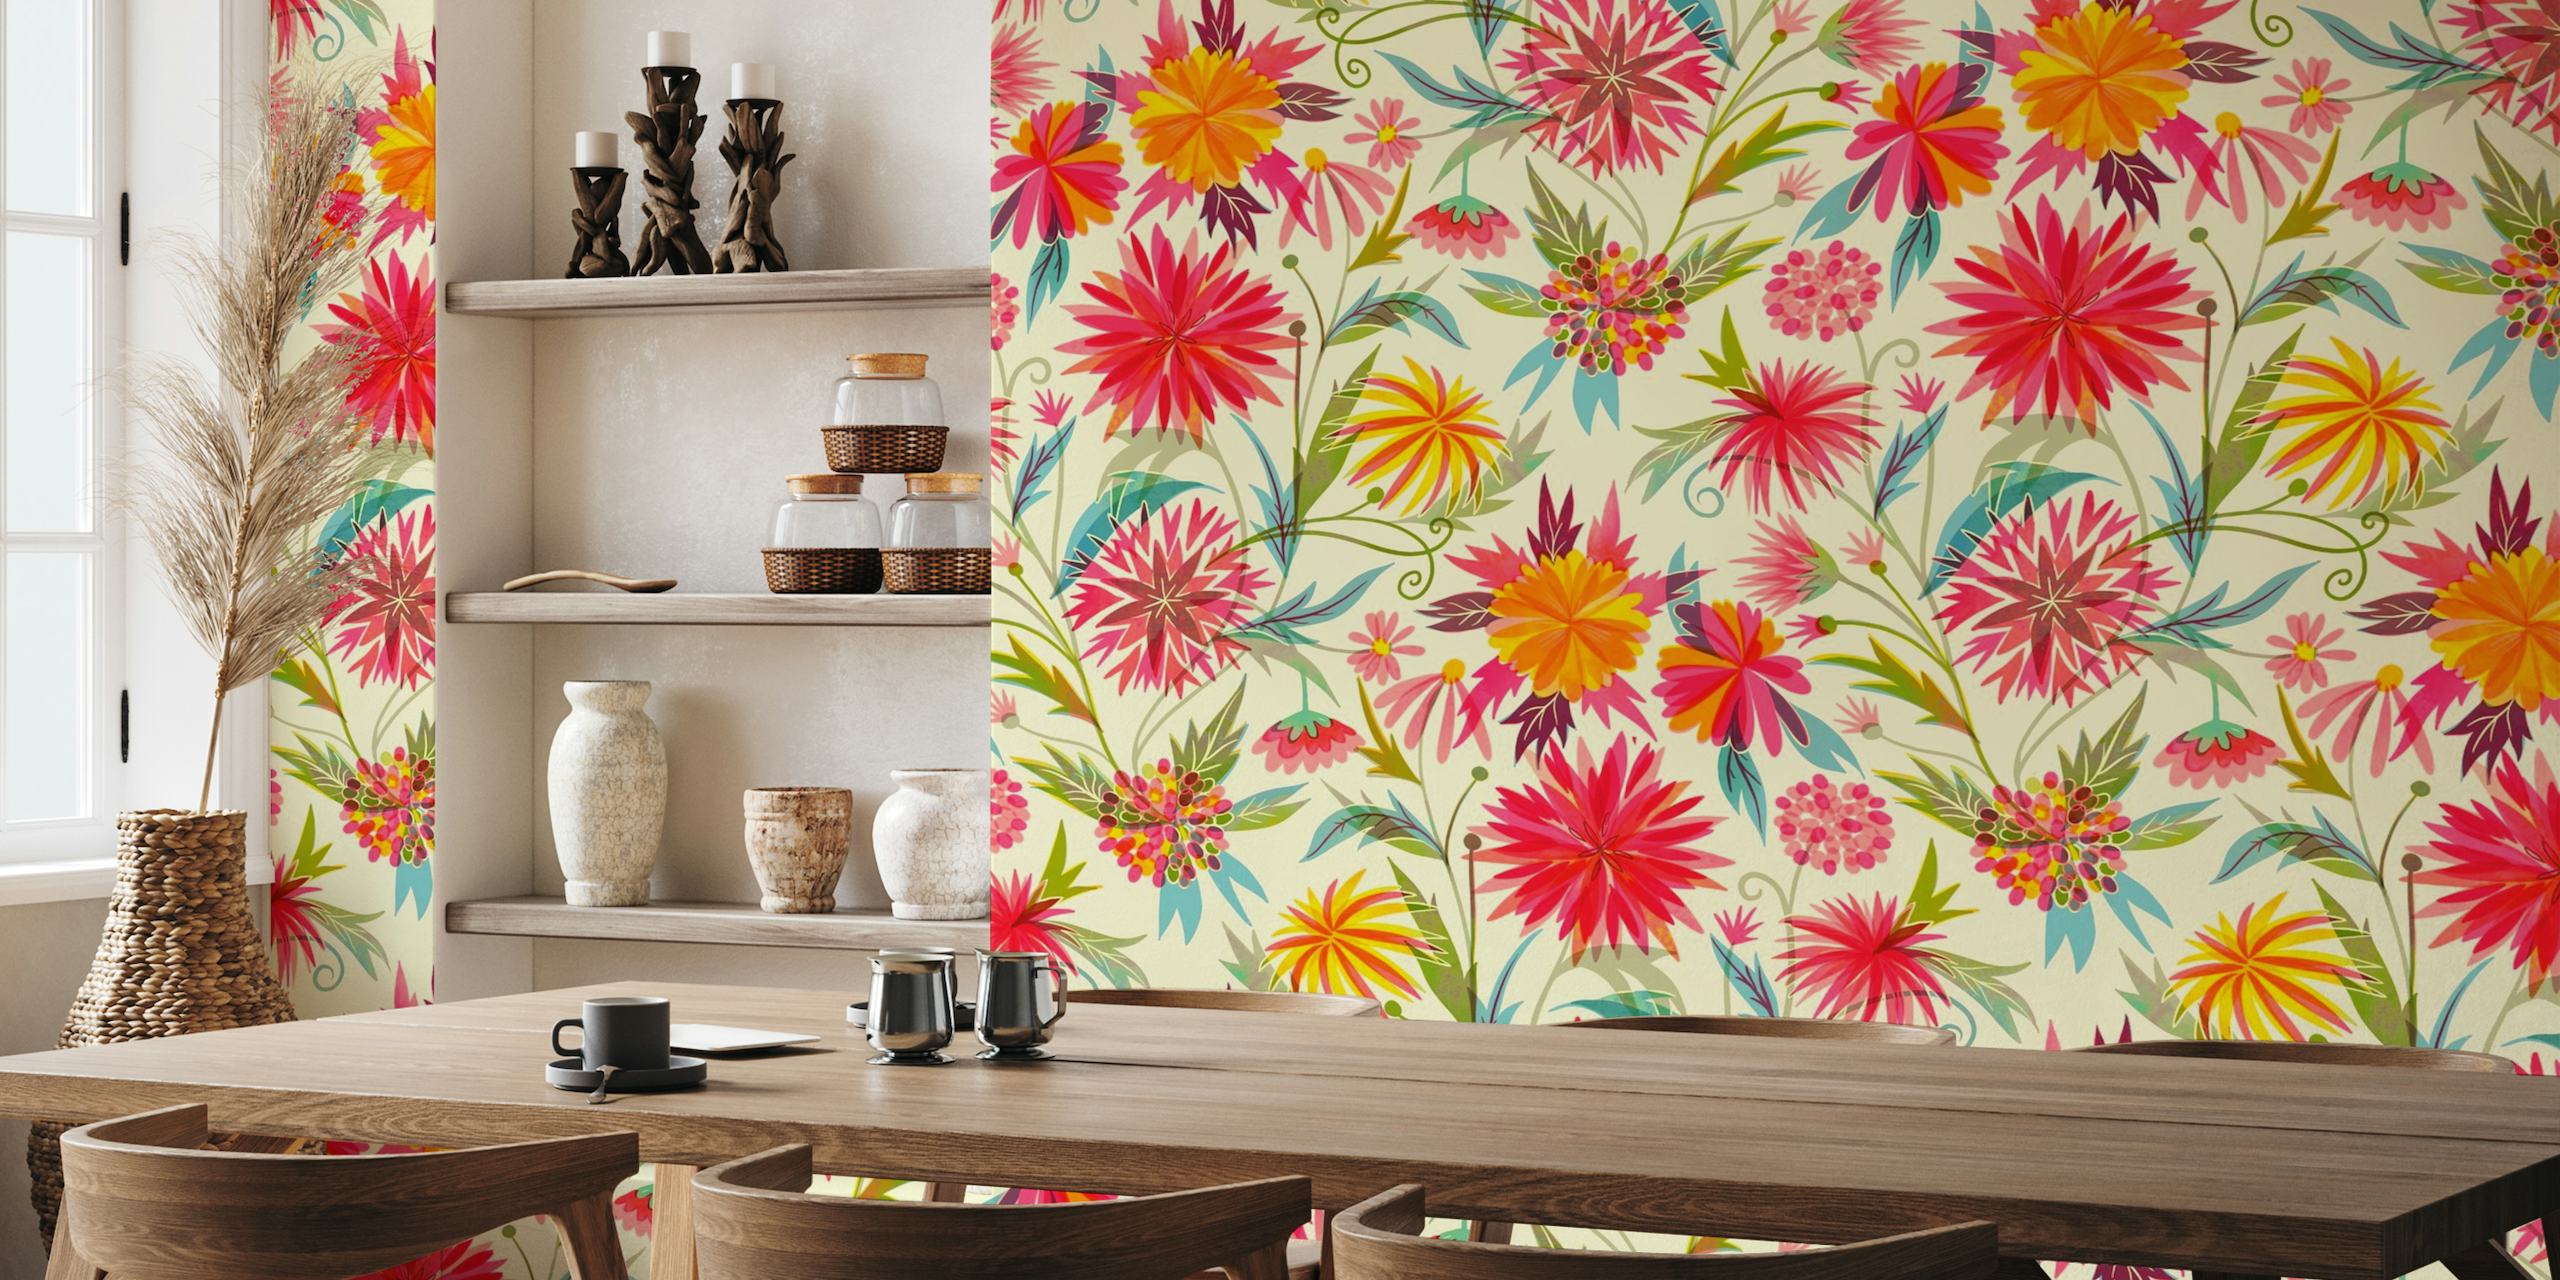 Colorful dahlias wall mural with multicolored flowers on a cream background